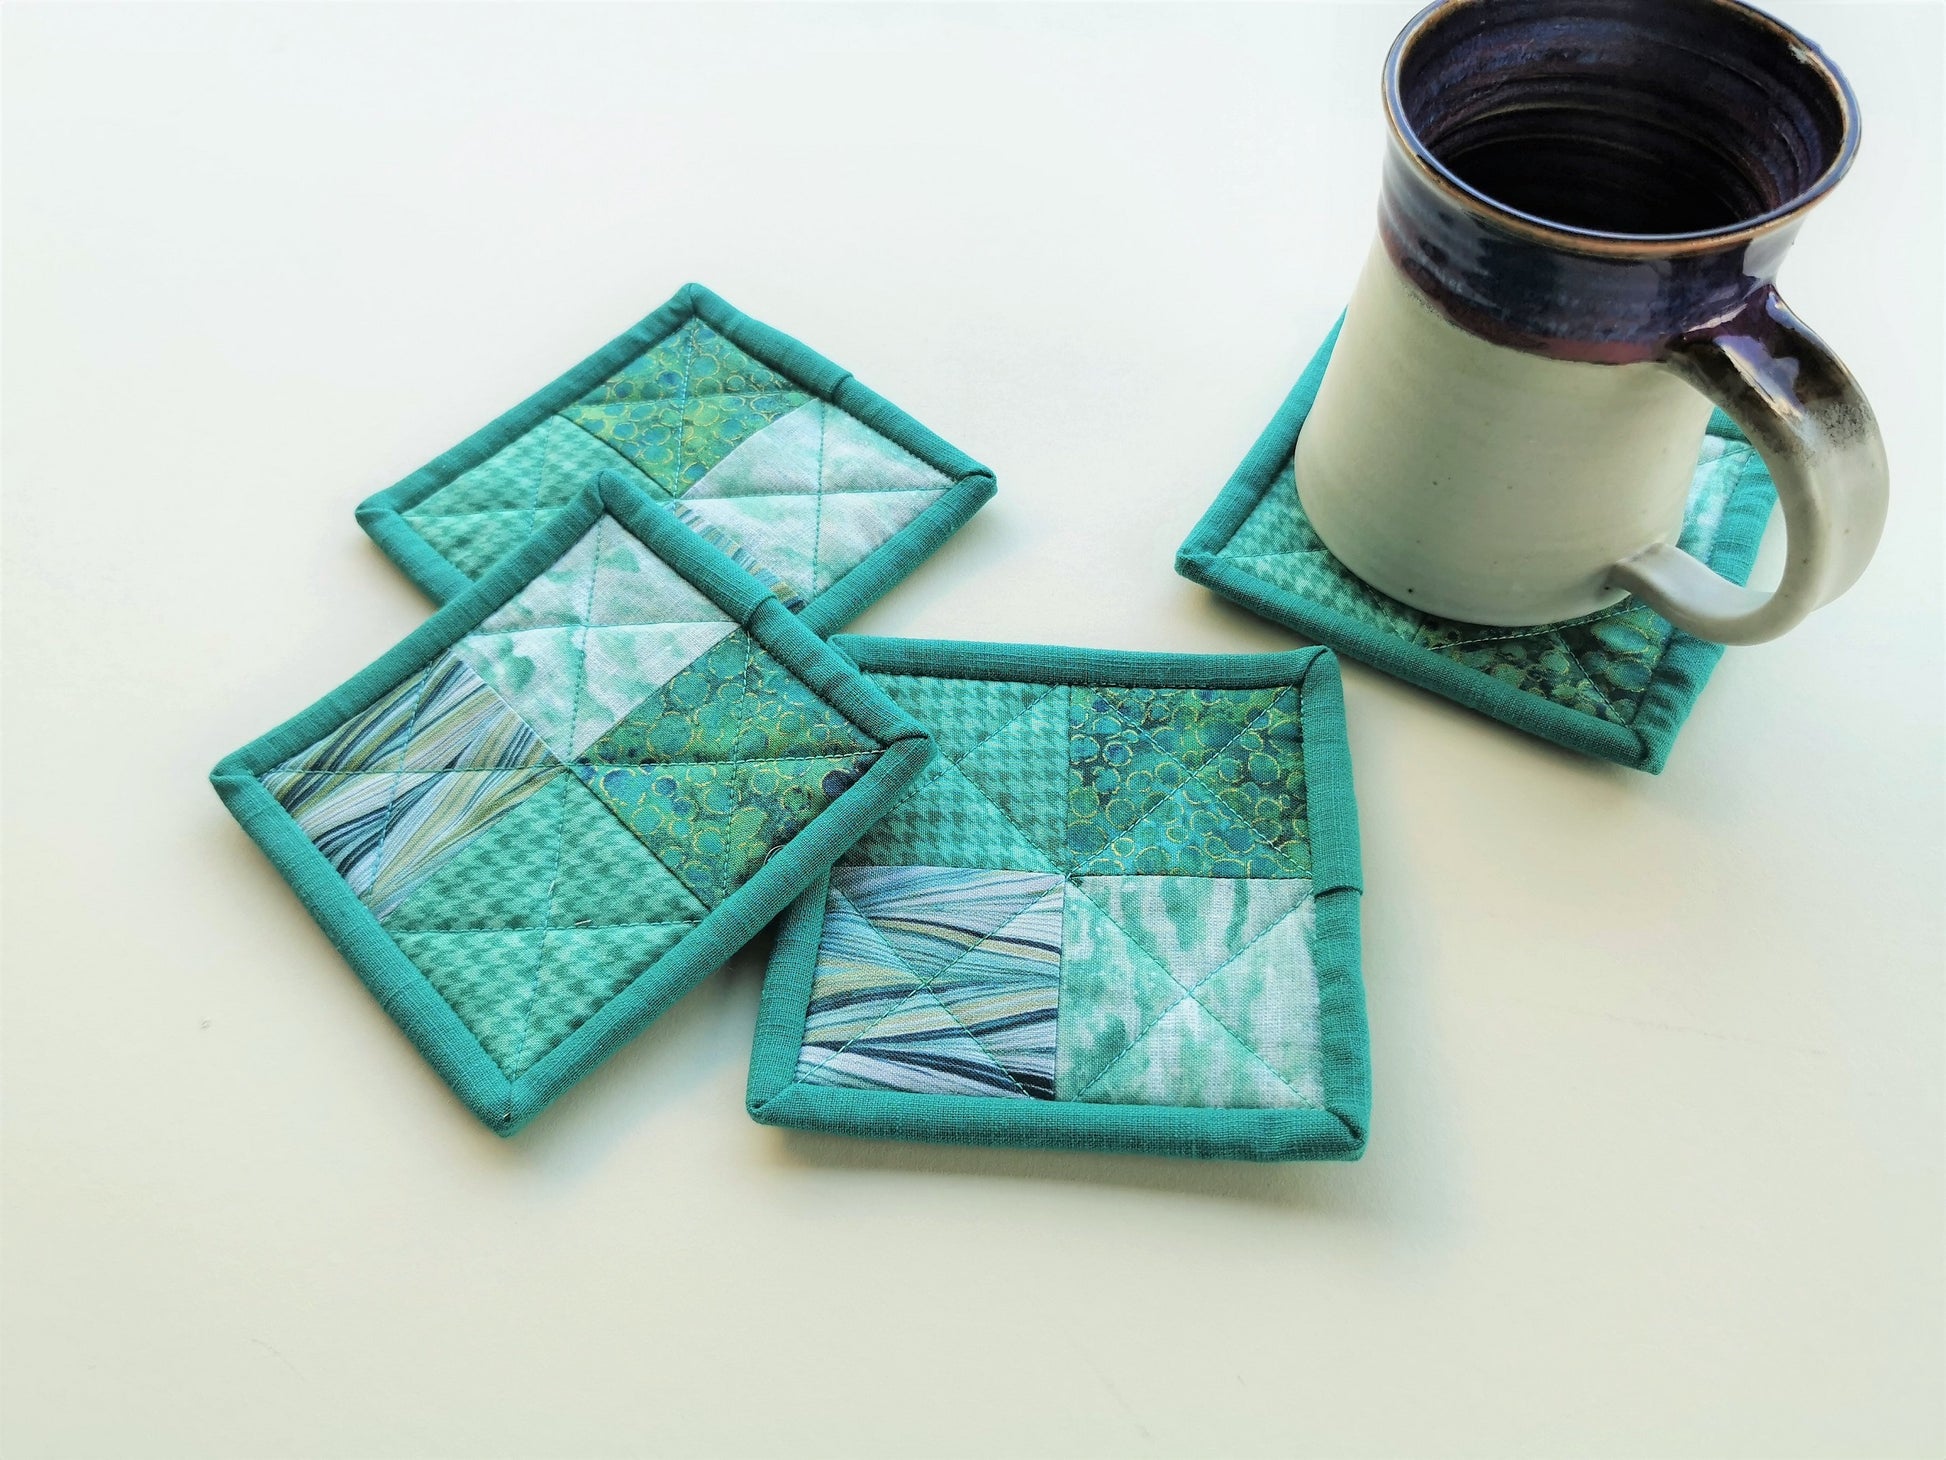 four quilted coasters in modern teal fabrics are displayed with a coffee mug sitting on one of them, showing scale.